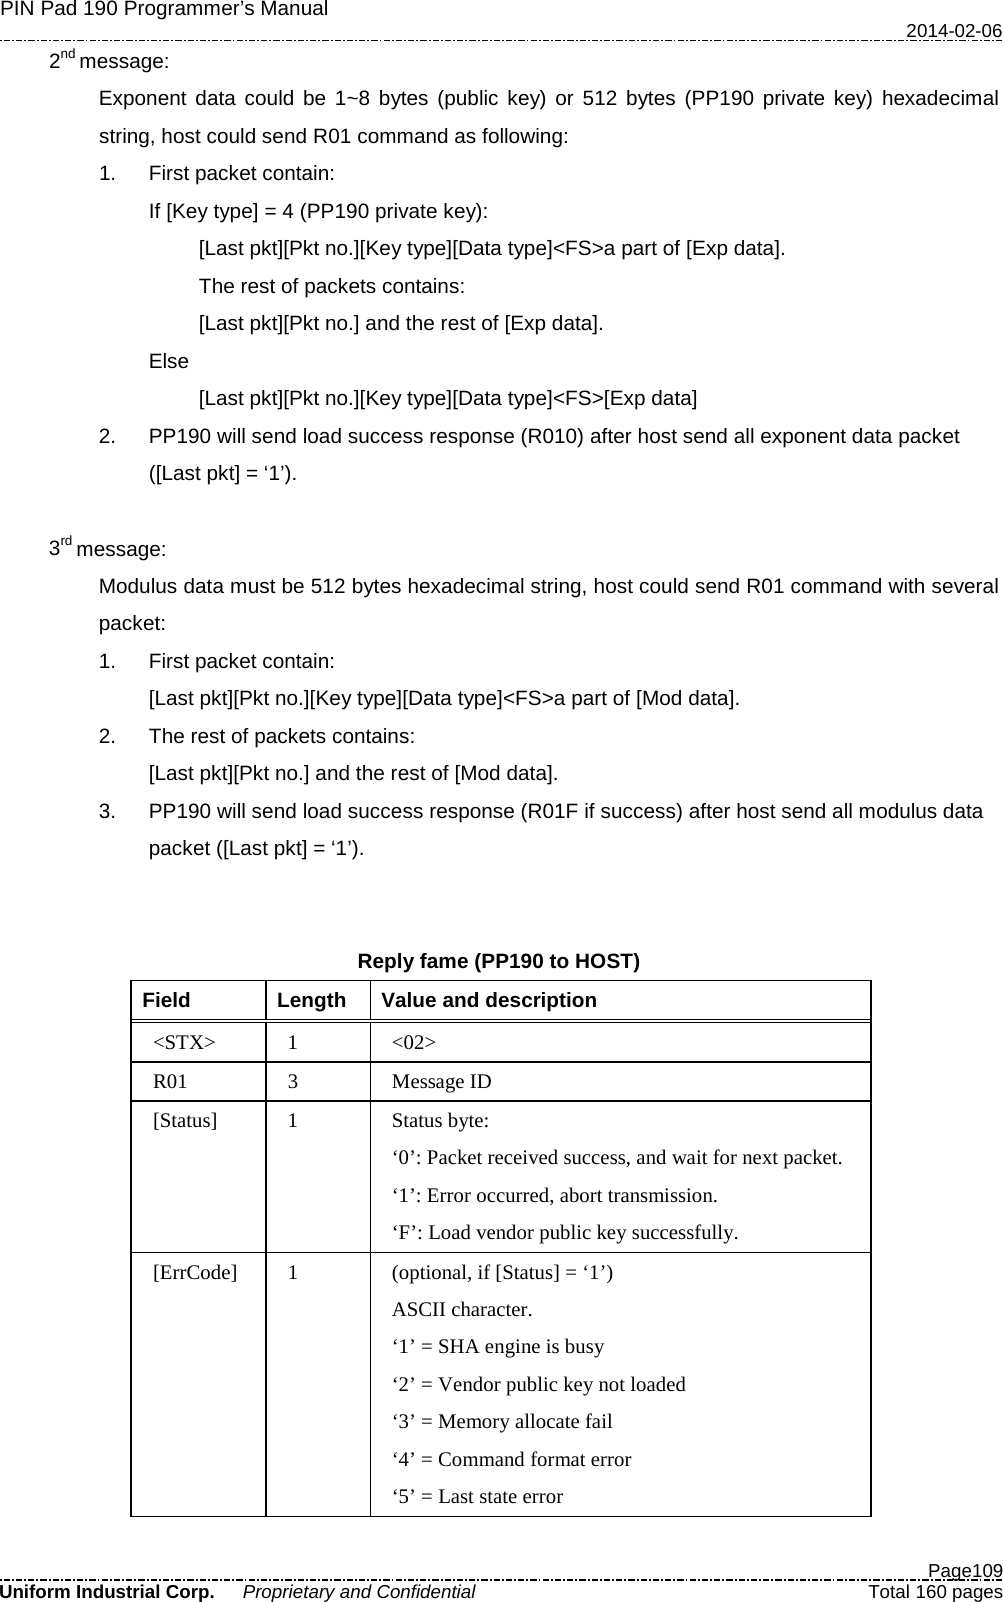 PIN Pad 190 Programmer’s Manual   2014-02-06  Page109 Uniform Industrial Corp. Proprietary and Confidential  Total 160 pages   2nd message: Exponent data could be 1~8 bytes (public key) or 512 bytes (PP190 private key) hexadecimal string, host could send R01 command as following: 1. First packet contain: If [Key type] = 4 (PP190 private key): [Last pkt][Pkt no.][Key type][Data type]&lt;FS&gt;a part of [Exp data]. The rest of packets contains: [Last pkt][Pkt no.] and the rest of [Exp data]. Else [Last pkt][Pkt no.][Key type][Data type]&lt;FS&gt;[Exp data] 2. PP190 will send load success response (R010) after host send all exponent data packet ([Last pkt] = ‘1’).    3rd message: Modulus data must be 512 bytes hexadecimal string, host could send R01 command with several packet: 1. First packet contain: [Last pkt][Pkt no.][Key type][Data type]&lt;FS&gt;a part of [Mod data]. 2. The rest of packets contains: [Last pkt][Pkt no.] and the rest of [Mod data]. 3. PP190 will send load success response (R01F if success) after host send all modulus data packet ([Last pkt] = ‘1’).   Reply fame (PP190 to HOST) Field  Length  Value and description &lt;STX&gt;  1  &lt;02&gt; R01  3  Message ID [Status]  1  Status byte: ‘0’: Packet received success, and wait for next packet. ‘1’: Error occurred, abort transmission. ‘F’: Load vendor public key successfully. [ErrCode]  1  (optional, if [Status] = ‘1’) ASCII character. ‘1’ = SHA engine is busy ‘2’ = Vendor public key not loaded ‘3’ = Memory allocate fail ‘4’ = Command format error ‘5’ = Last state error 